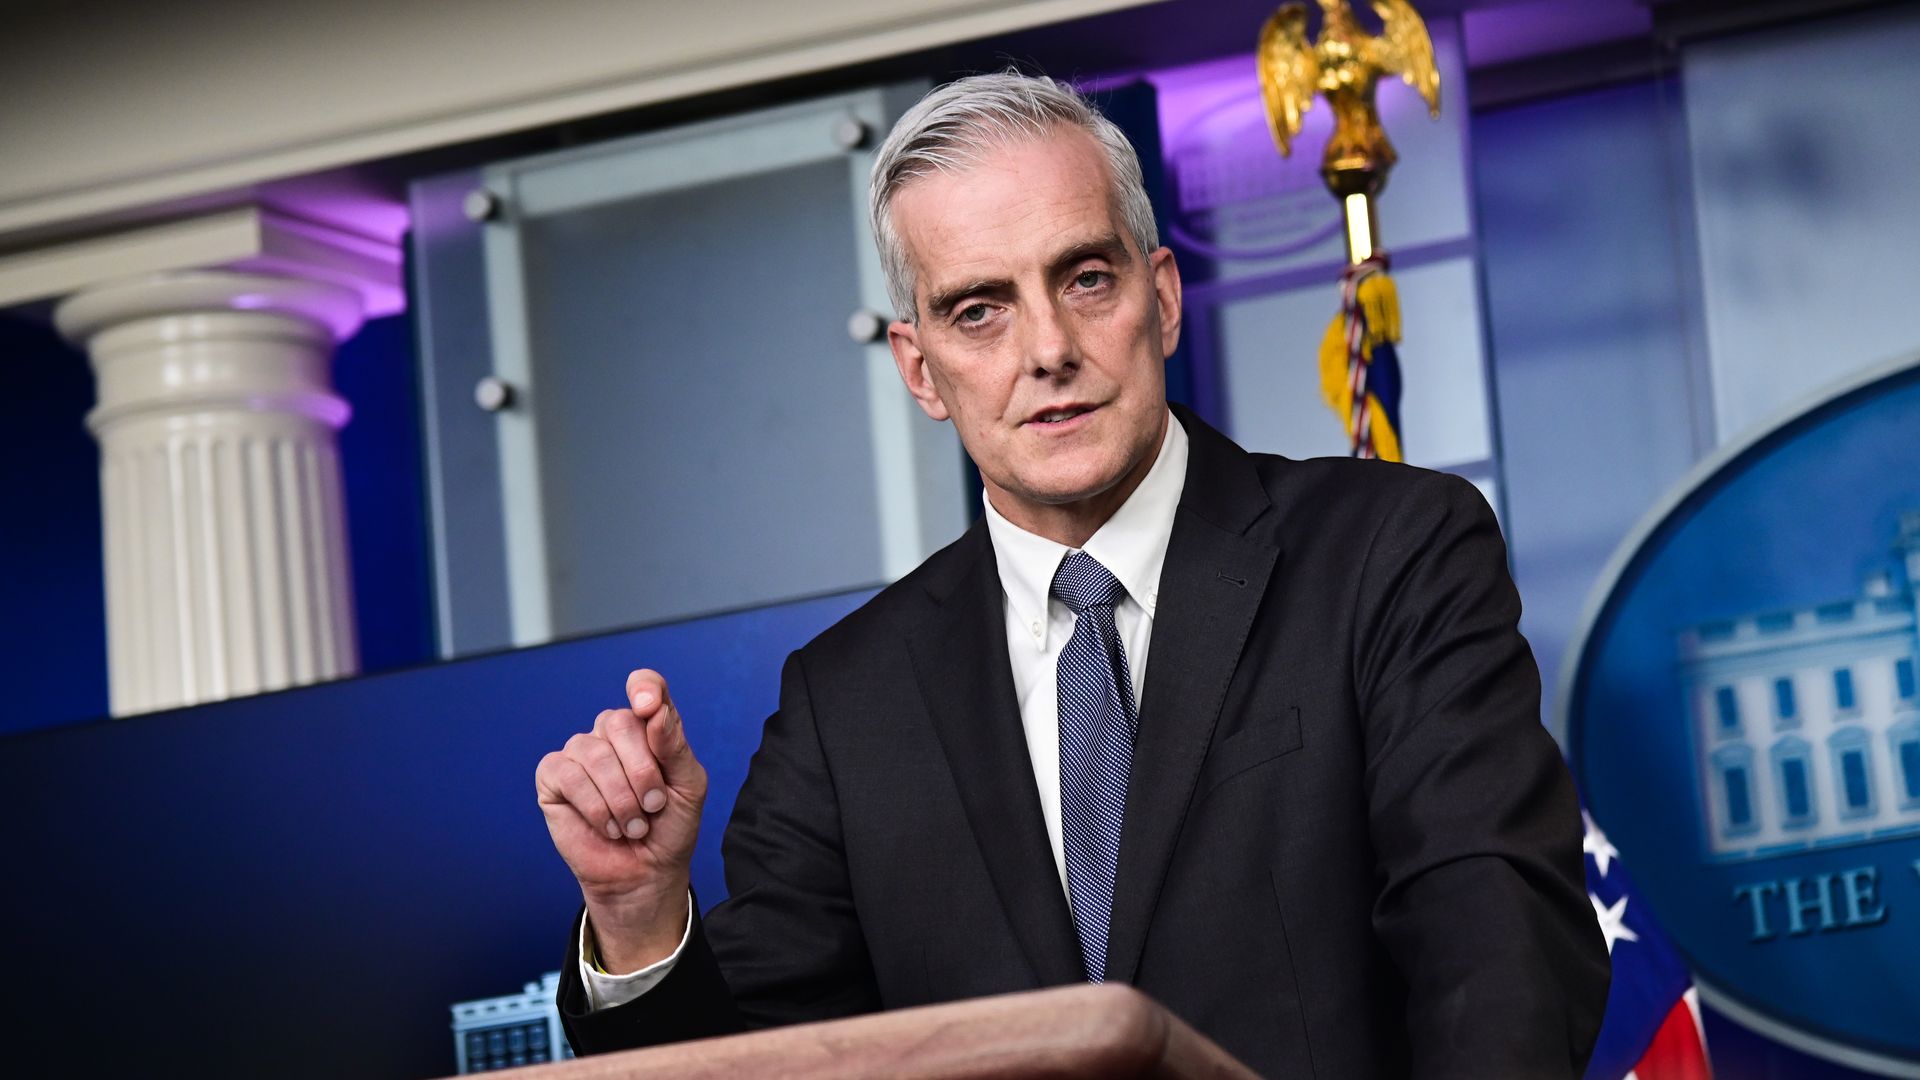 Denis McDonough, secretary of Veterans Affairs, speaking during a press conference in the White House in March 2021.